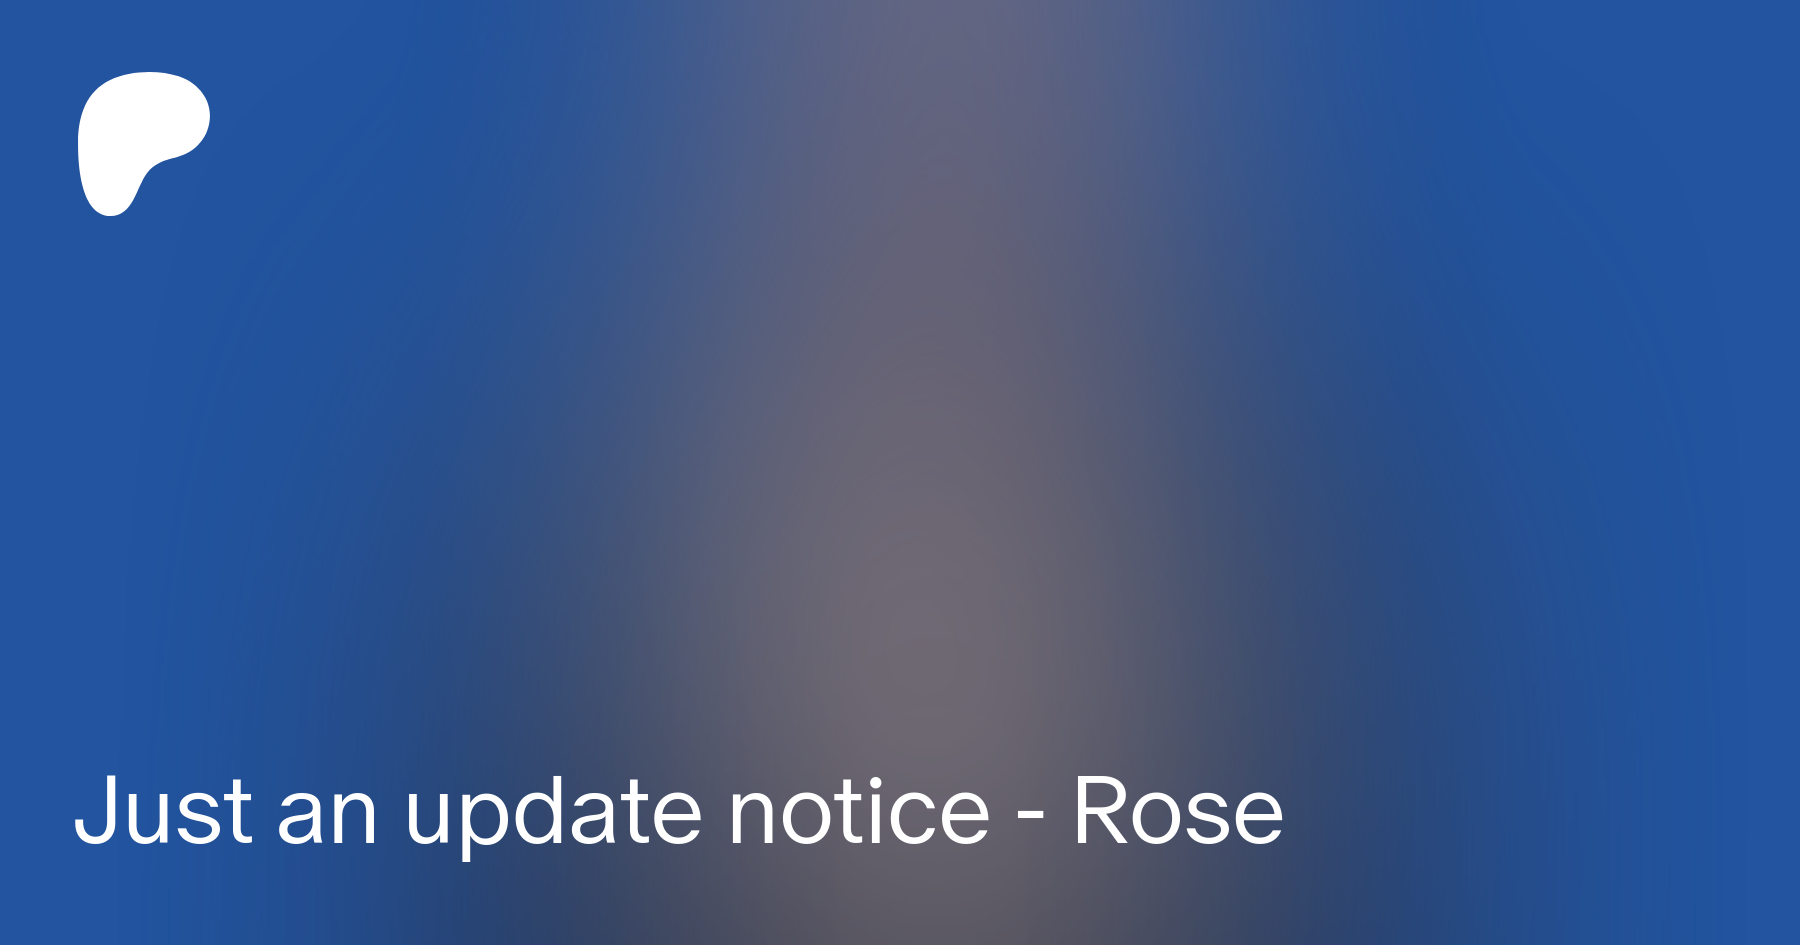 Just an update notice - Rose